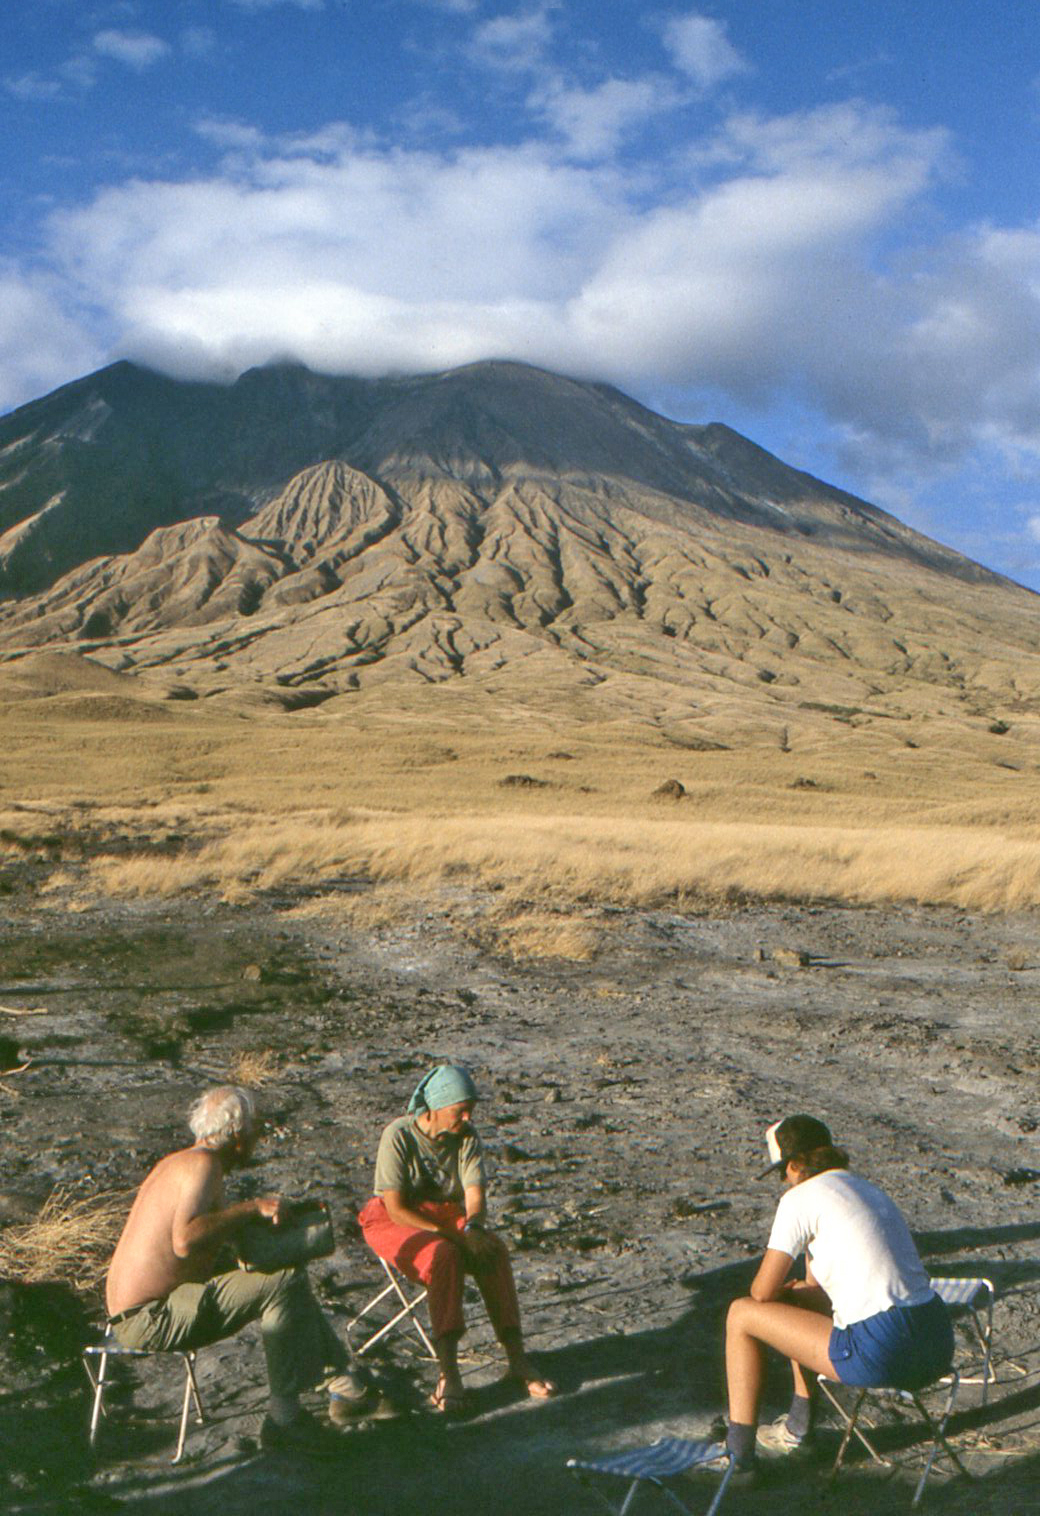 View of Oldoinyo Lengai from base camp, with Barry Dawson, Celia Nyamweru and Gill Norton.